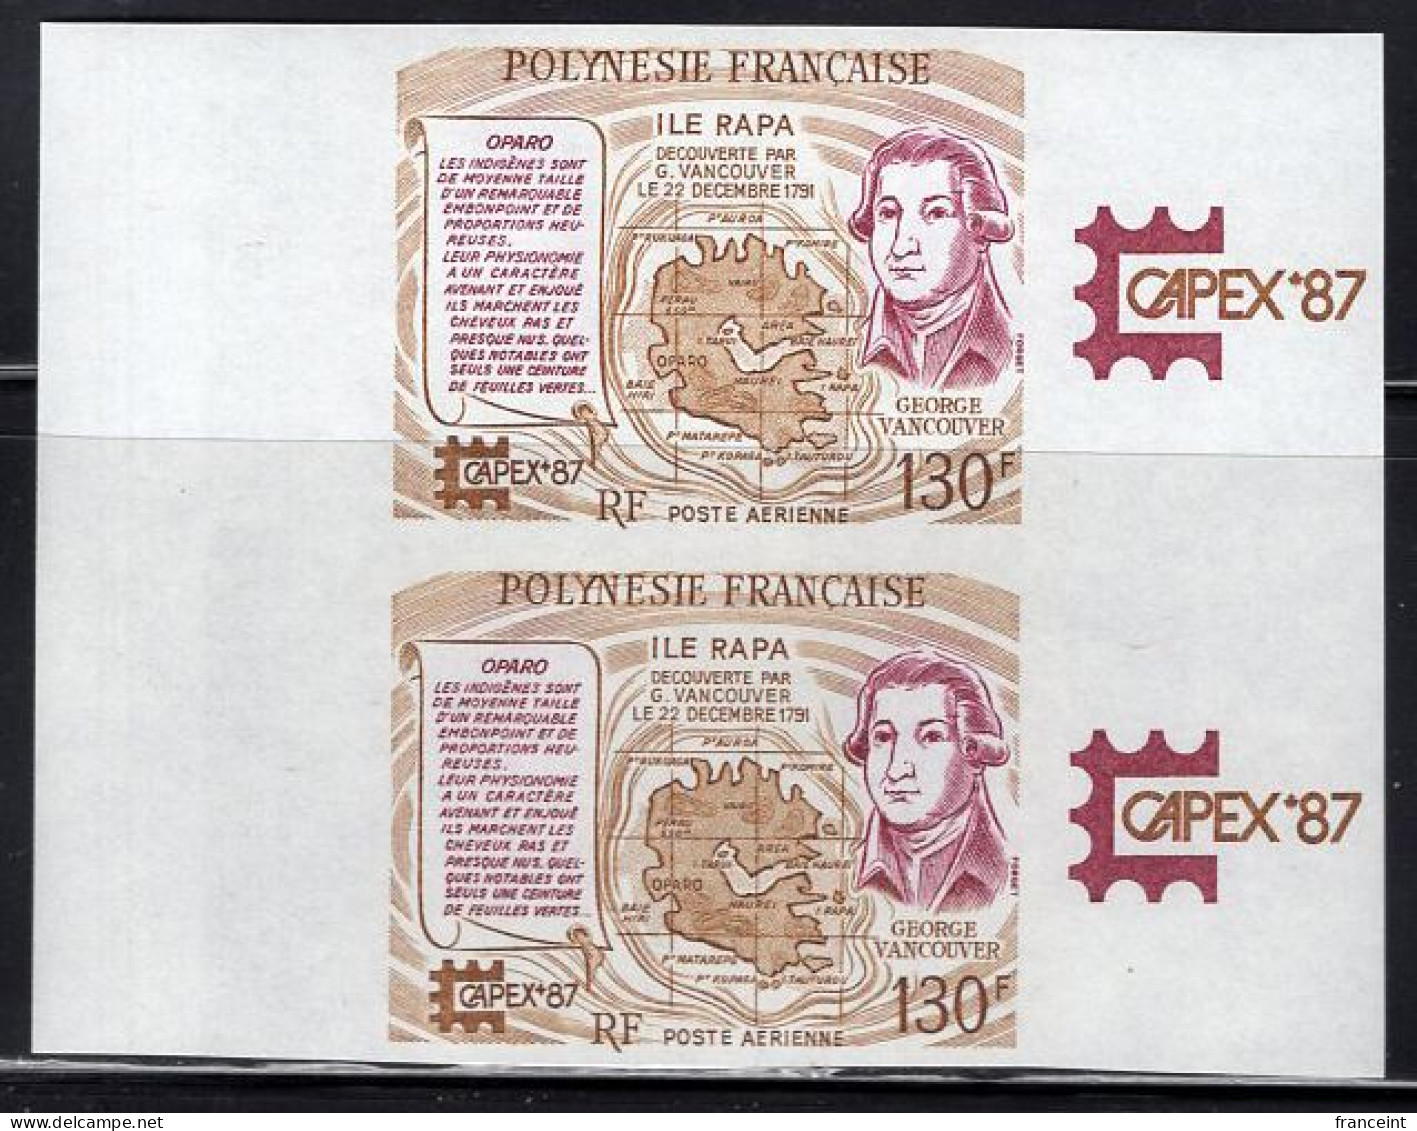 FRENCH POLYNESIA(1987) George Vancouver. Map Of Rapa Island. Imperforate Pair. Capex 87. Scott No C225, Yvert No PA197 - Imperforates, Proofs & Errors